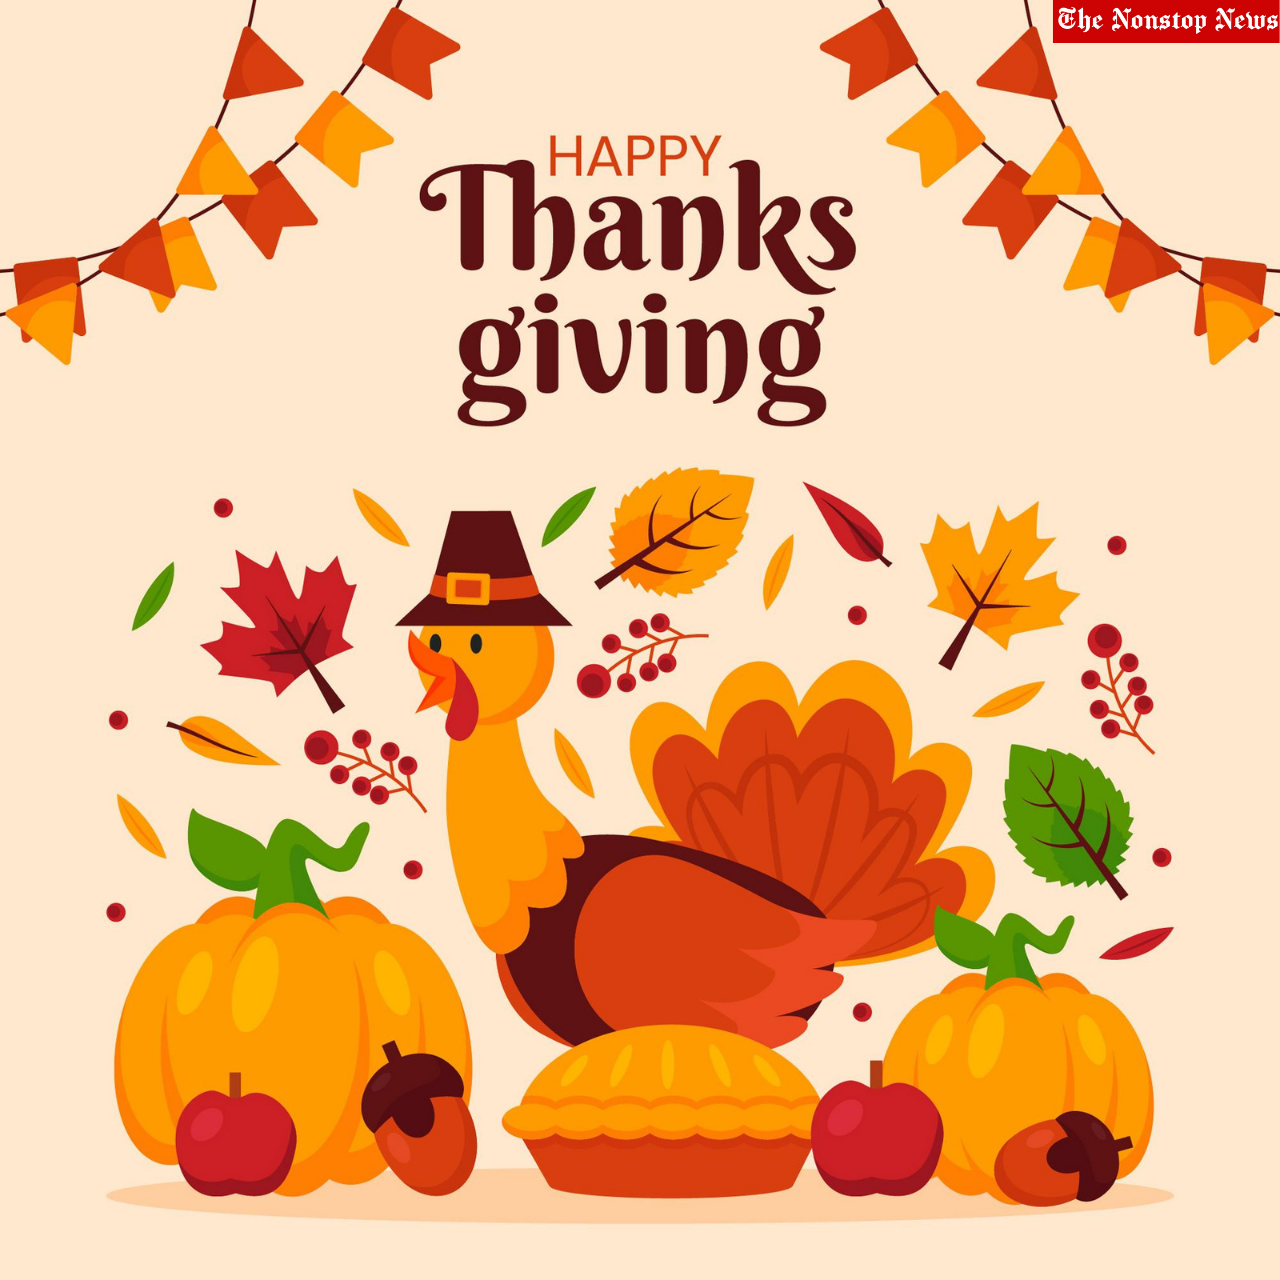 Thanksgiving 2021 Wishes, Quotes, Sayings, Messages, and HD Images for Business Clients